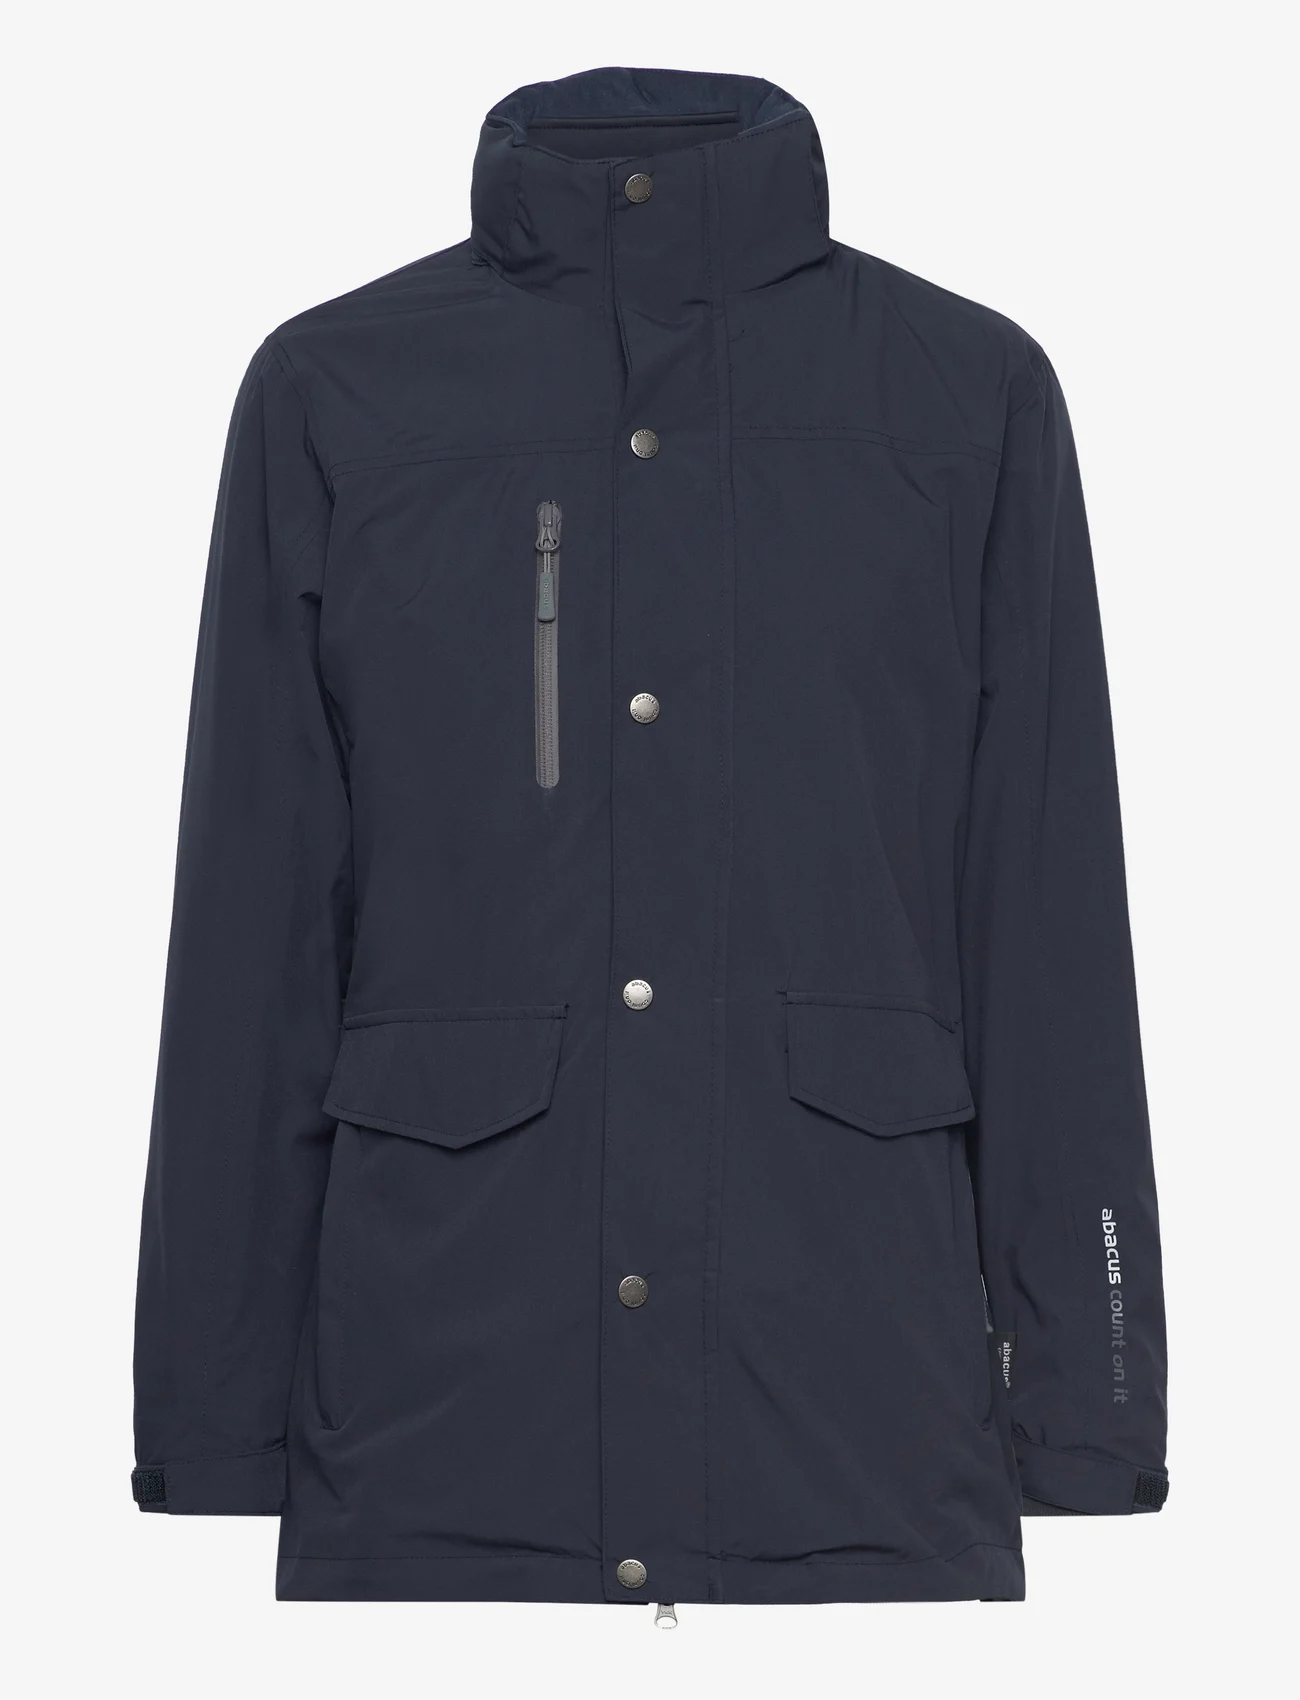 Abacus - Lds Staff 3 in1 jacket - parkad - navy - 0